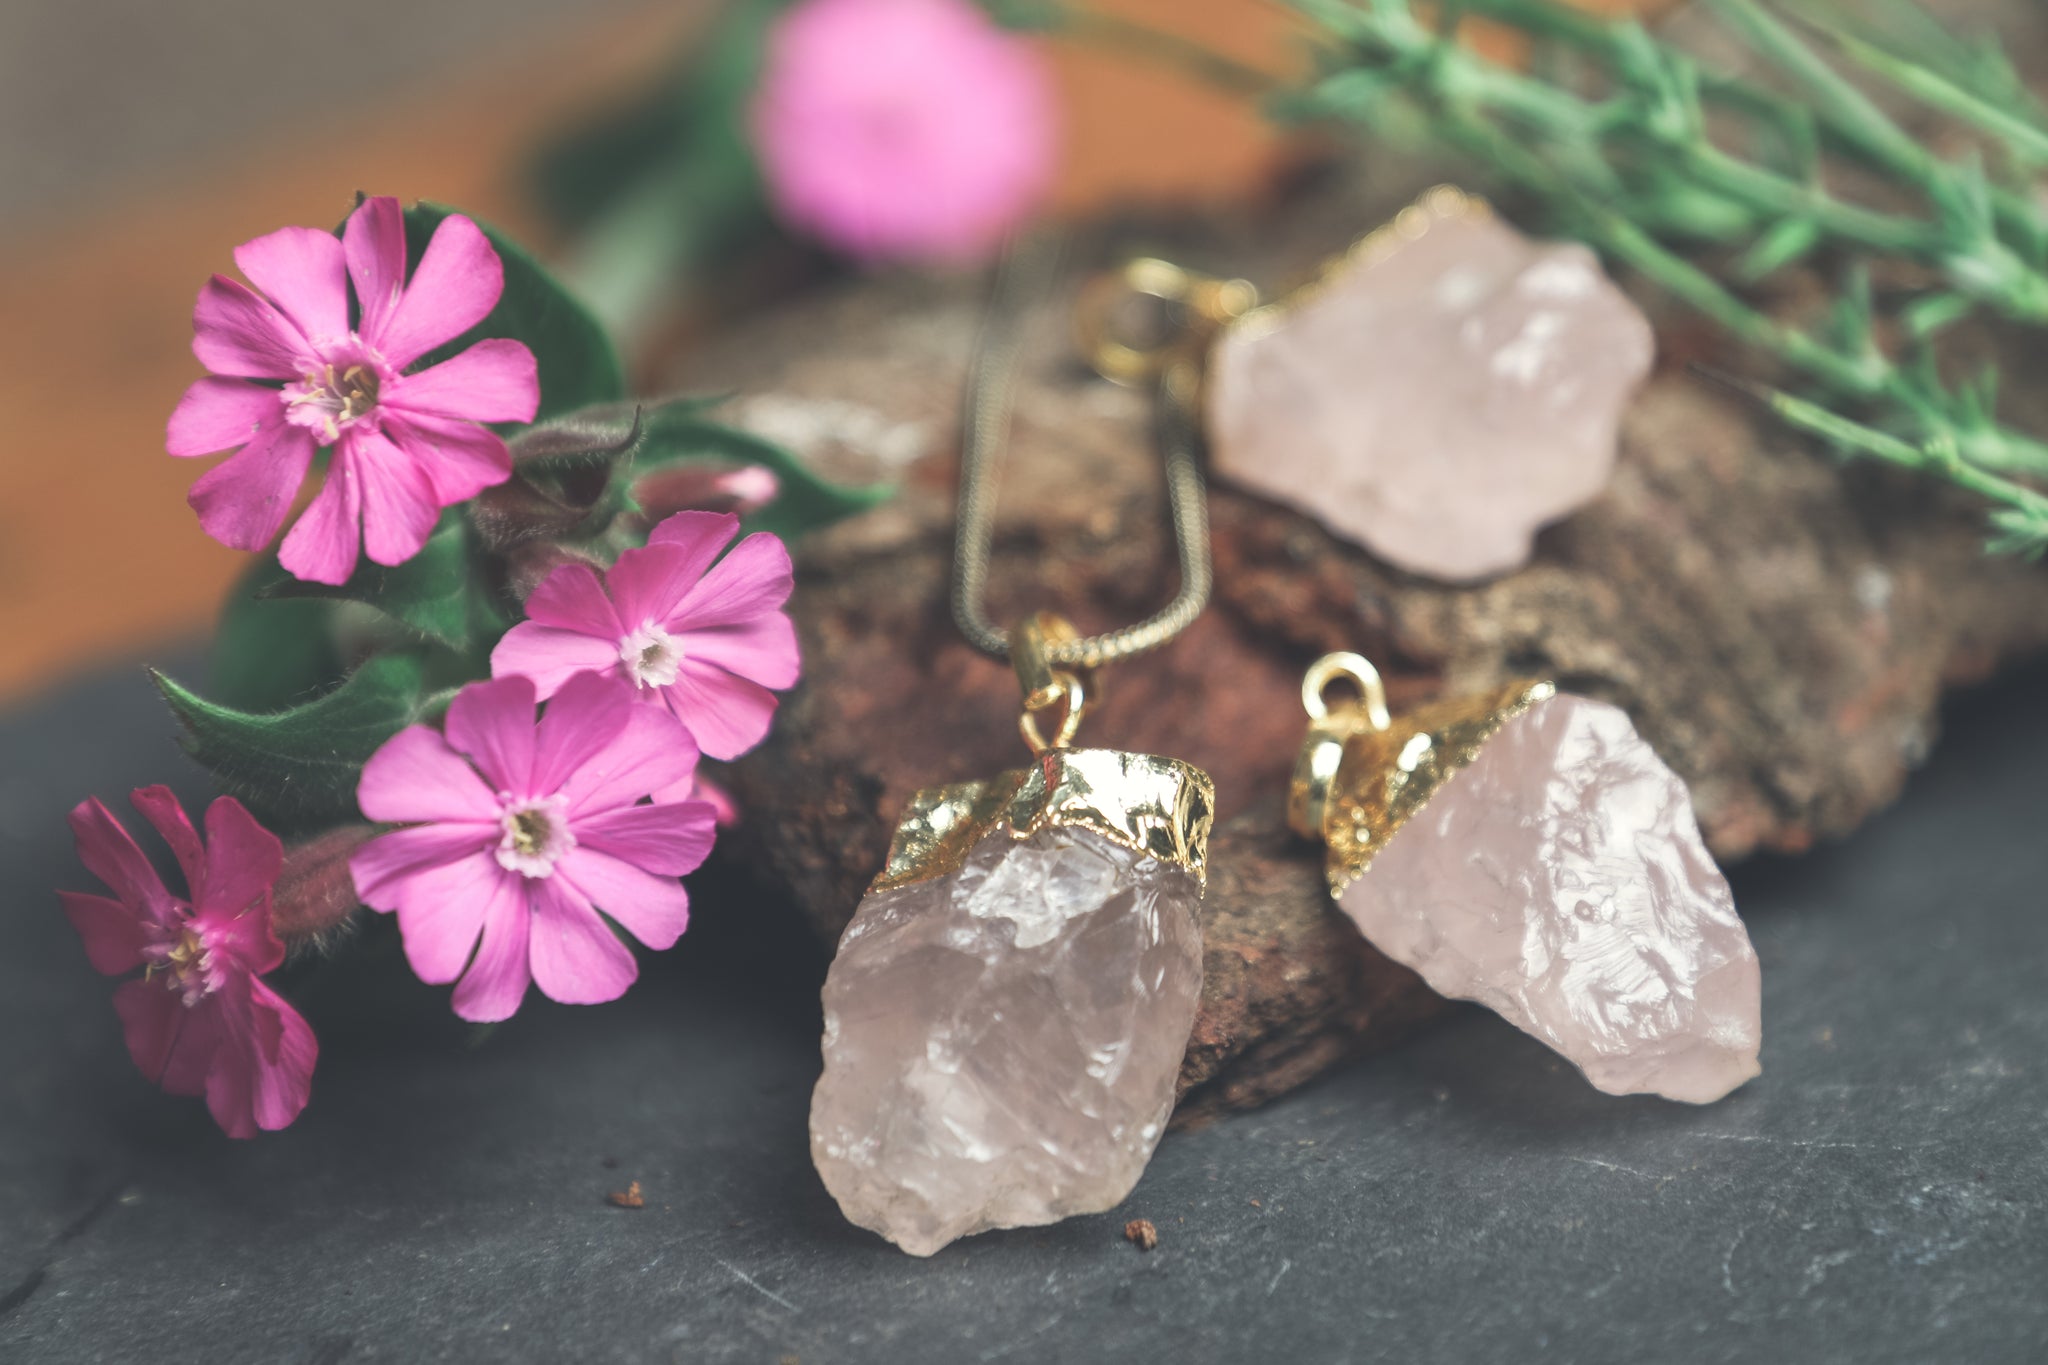 crystal jewellery, crystal necklace, bohemian apparel, festival fashion, ethical brand uk, rose quartz rough cut crystals